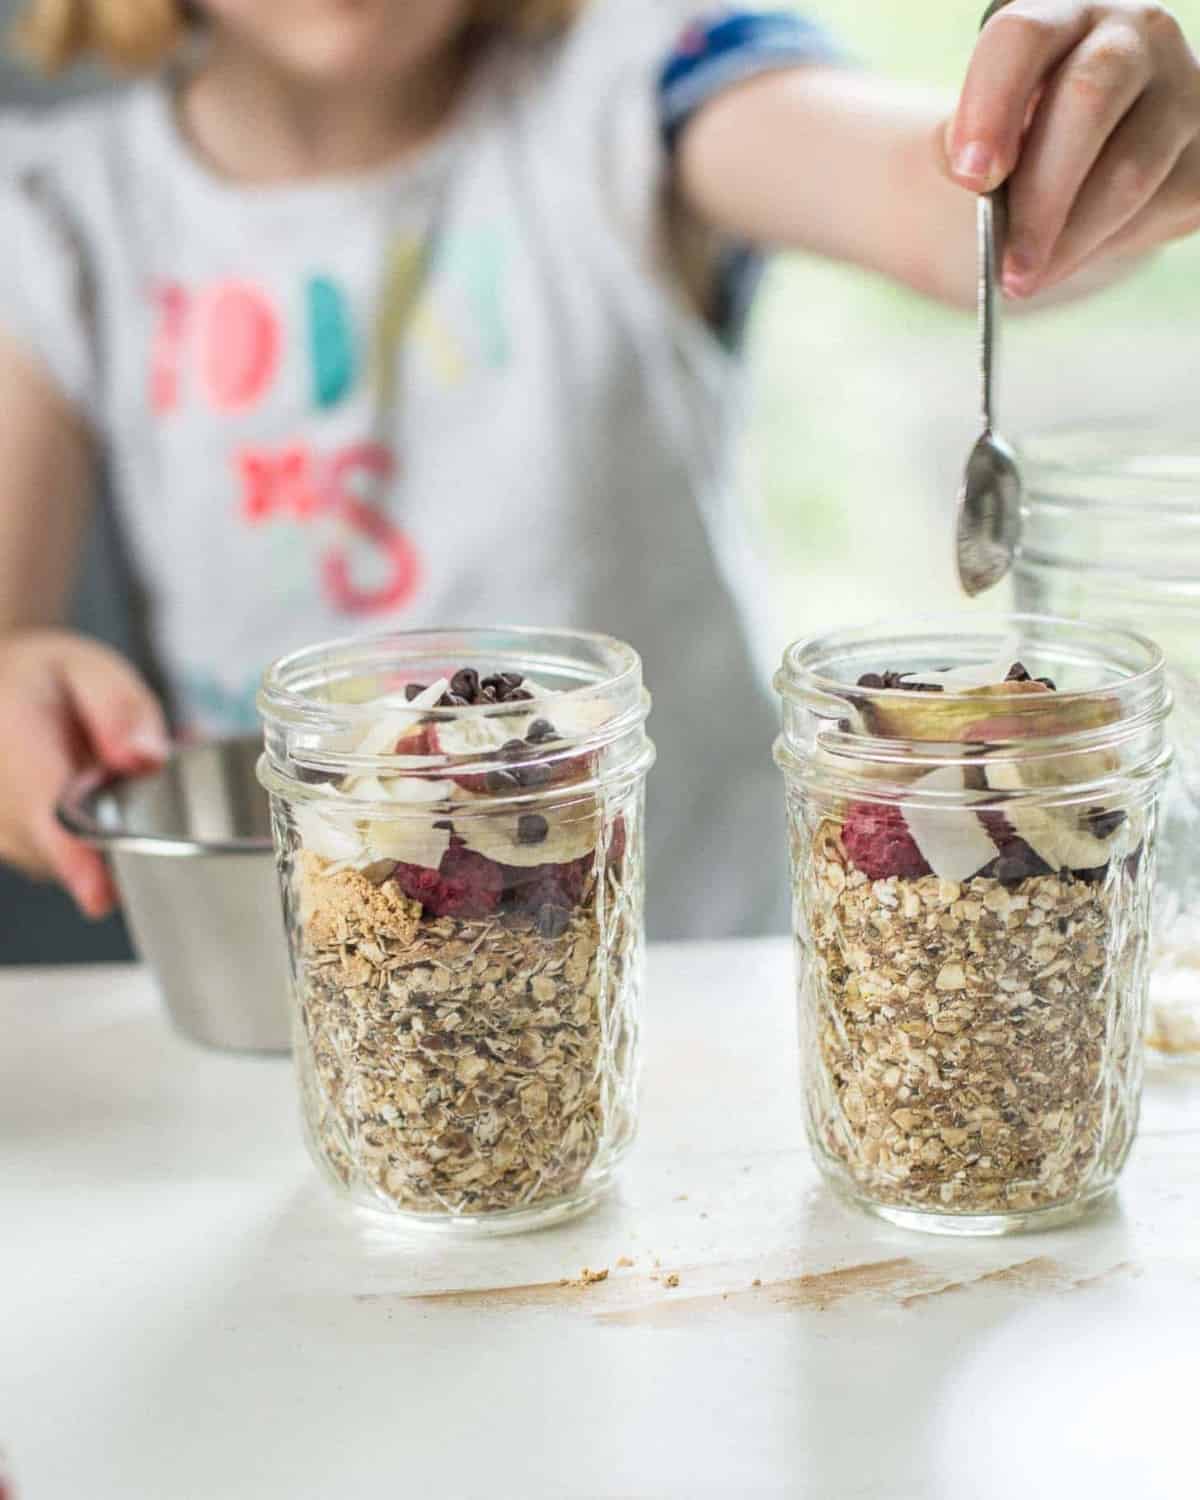 adding toppings to oatmeal in glass jars